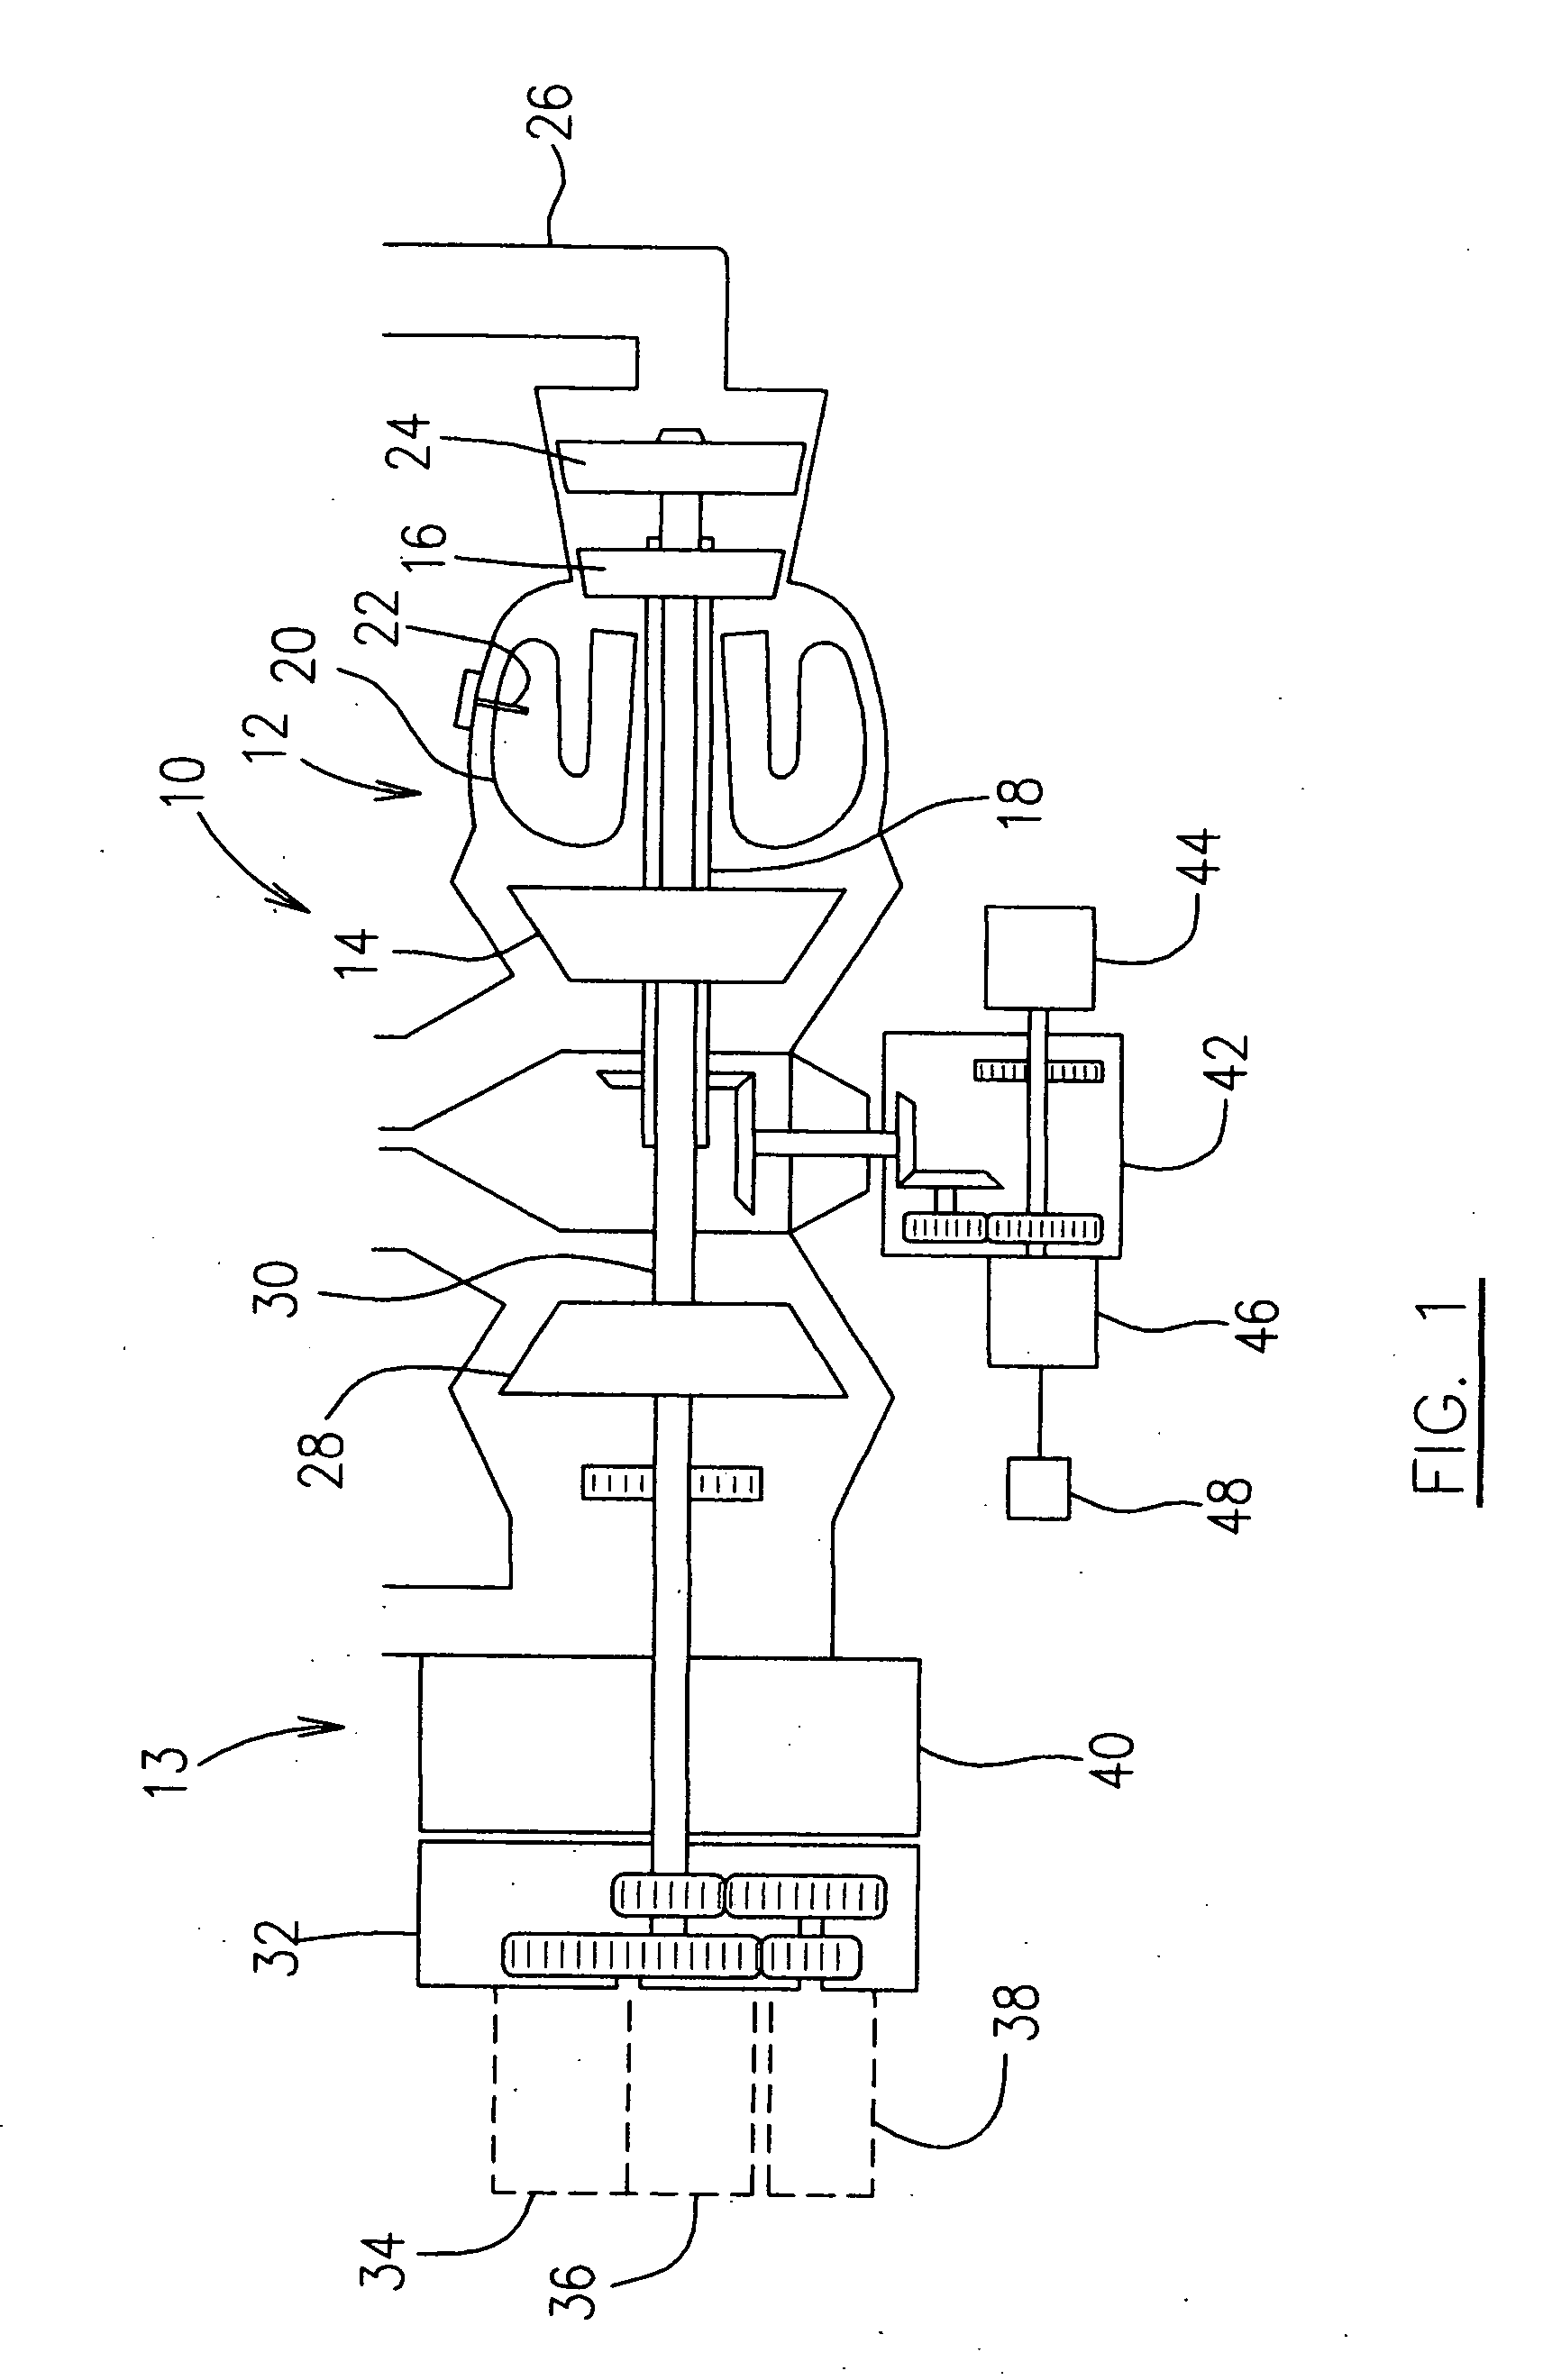 Modulated current gas turbine engine starting system